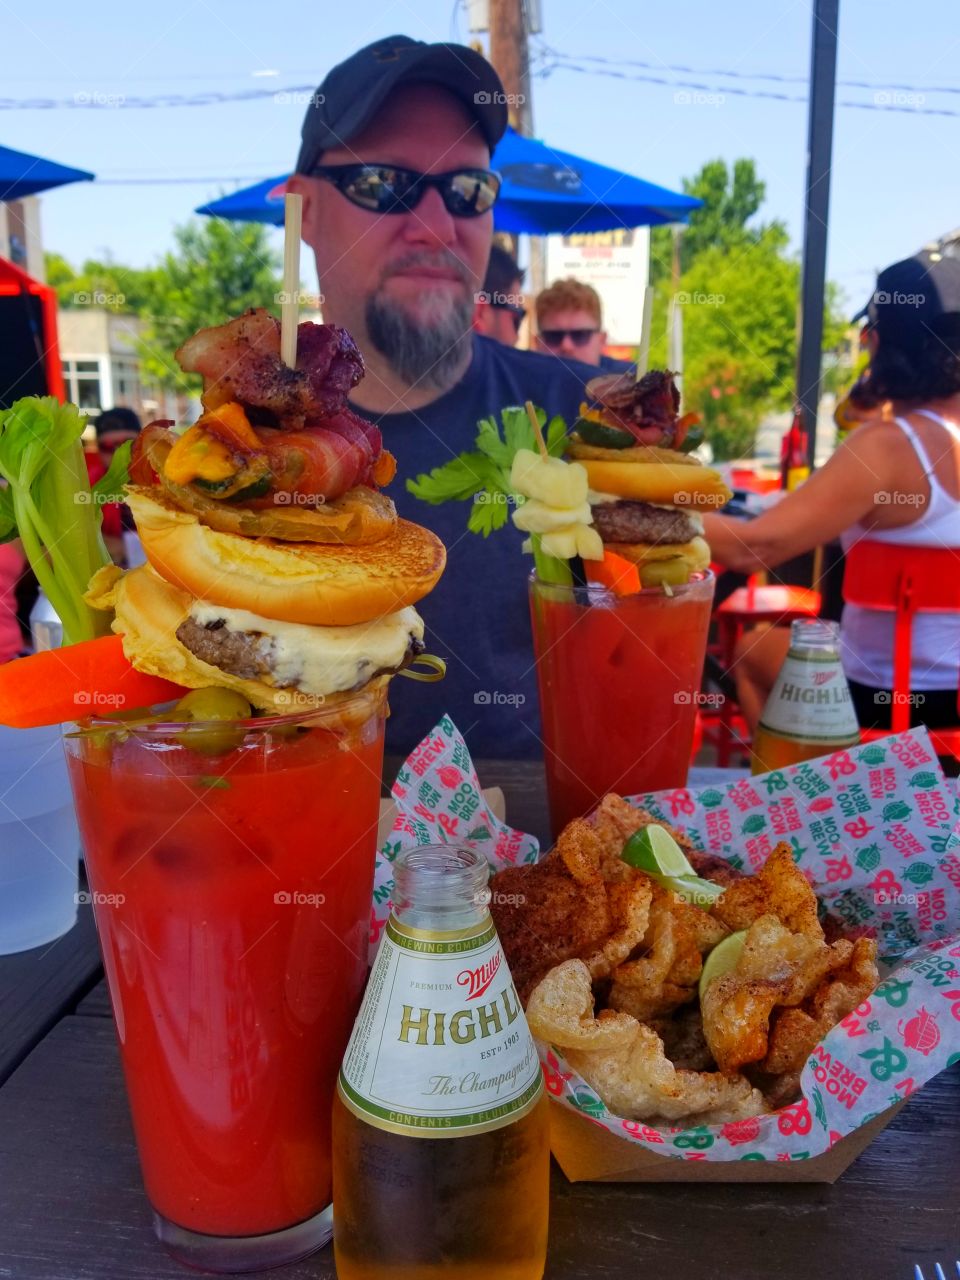 Happy man enjoying brunch time with amazingly loaded bloody mary cocktail complete with garnish stack with ice cold shorty Miller high life bottle sidekick and crunchy spiced homemade pork rinds on patio on sunny summer day.